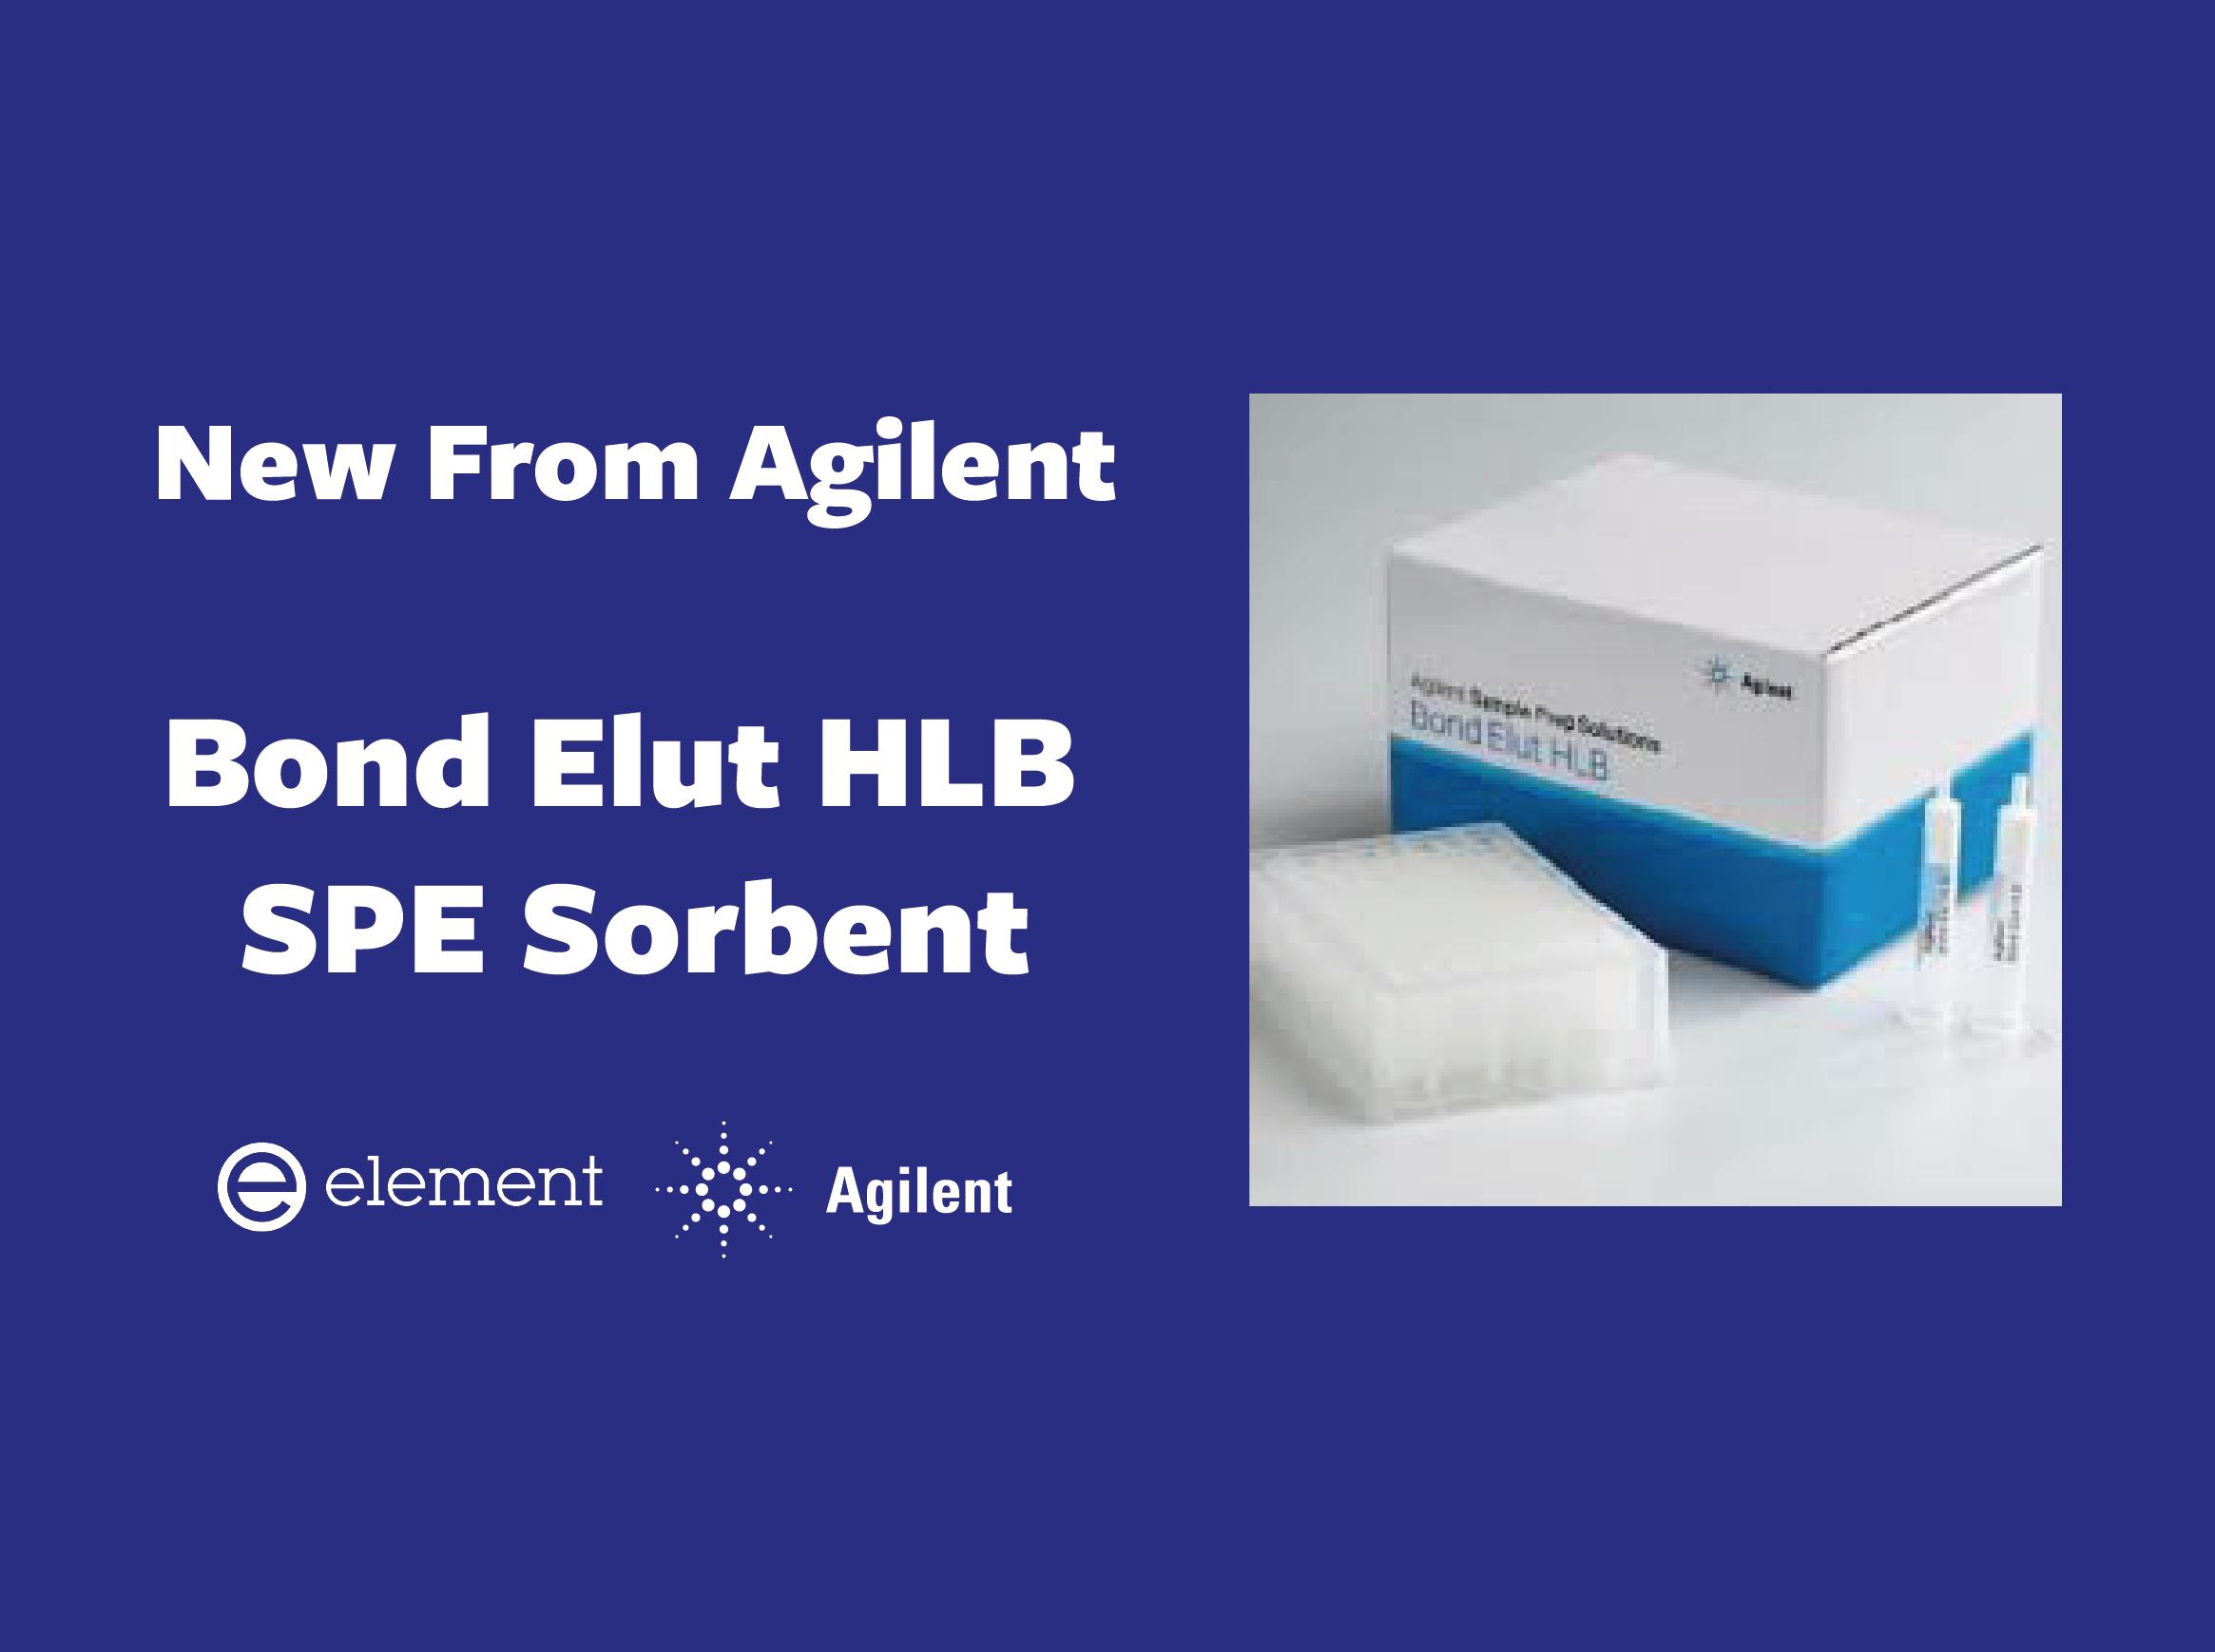 New Product Introduction – Bond Elut HLB from Agilent